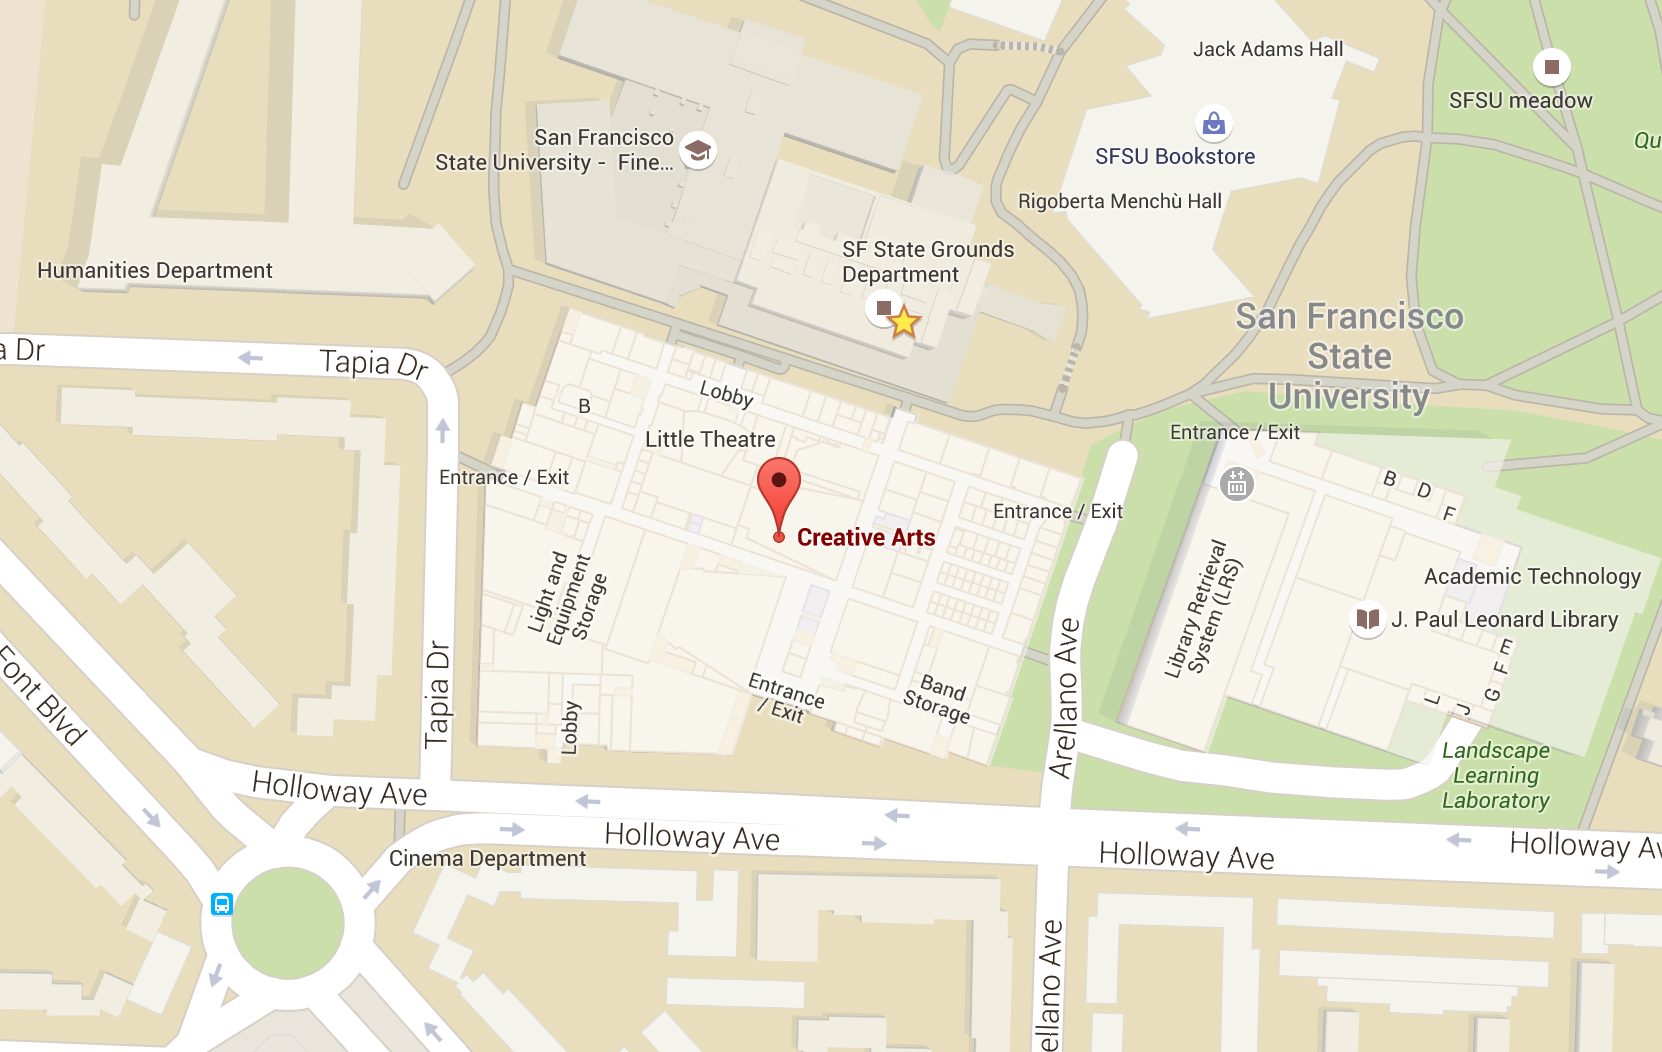 Google Map of Creative Arts Building and surrounding campus area